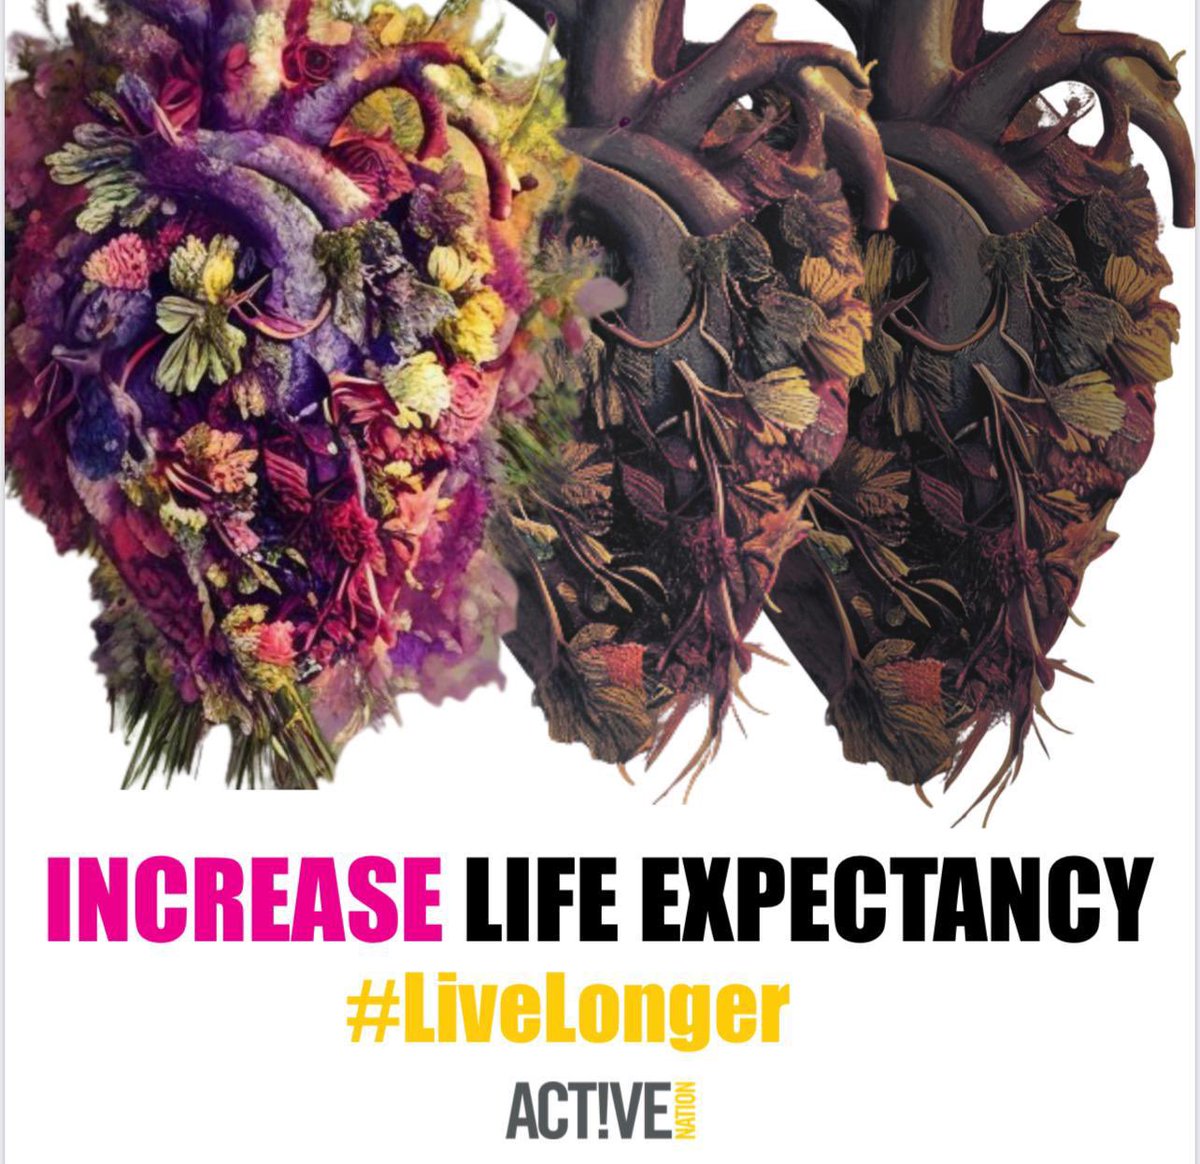 Increase Life Expectancy 

Get moving for a longer life!

Powered by #activenation - the Health and Well-Being Charity

bit.ly/3I435ej

#activenation  #ReduceMortalityRisk #Getmoving #Livelonger